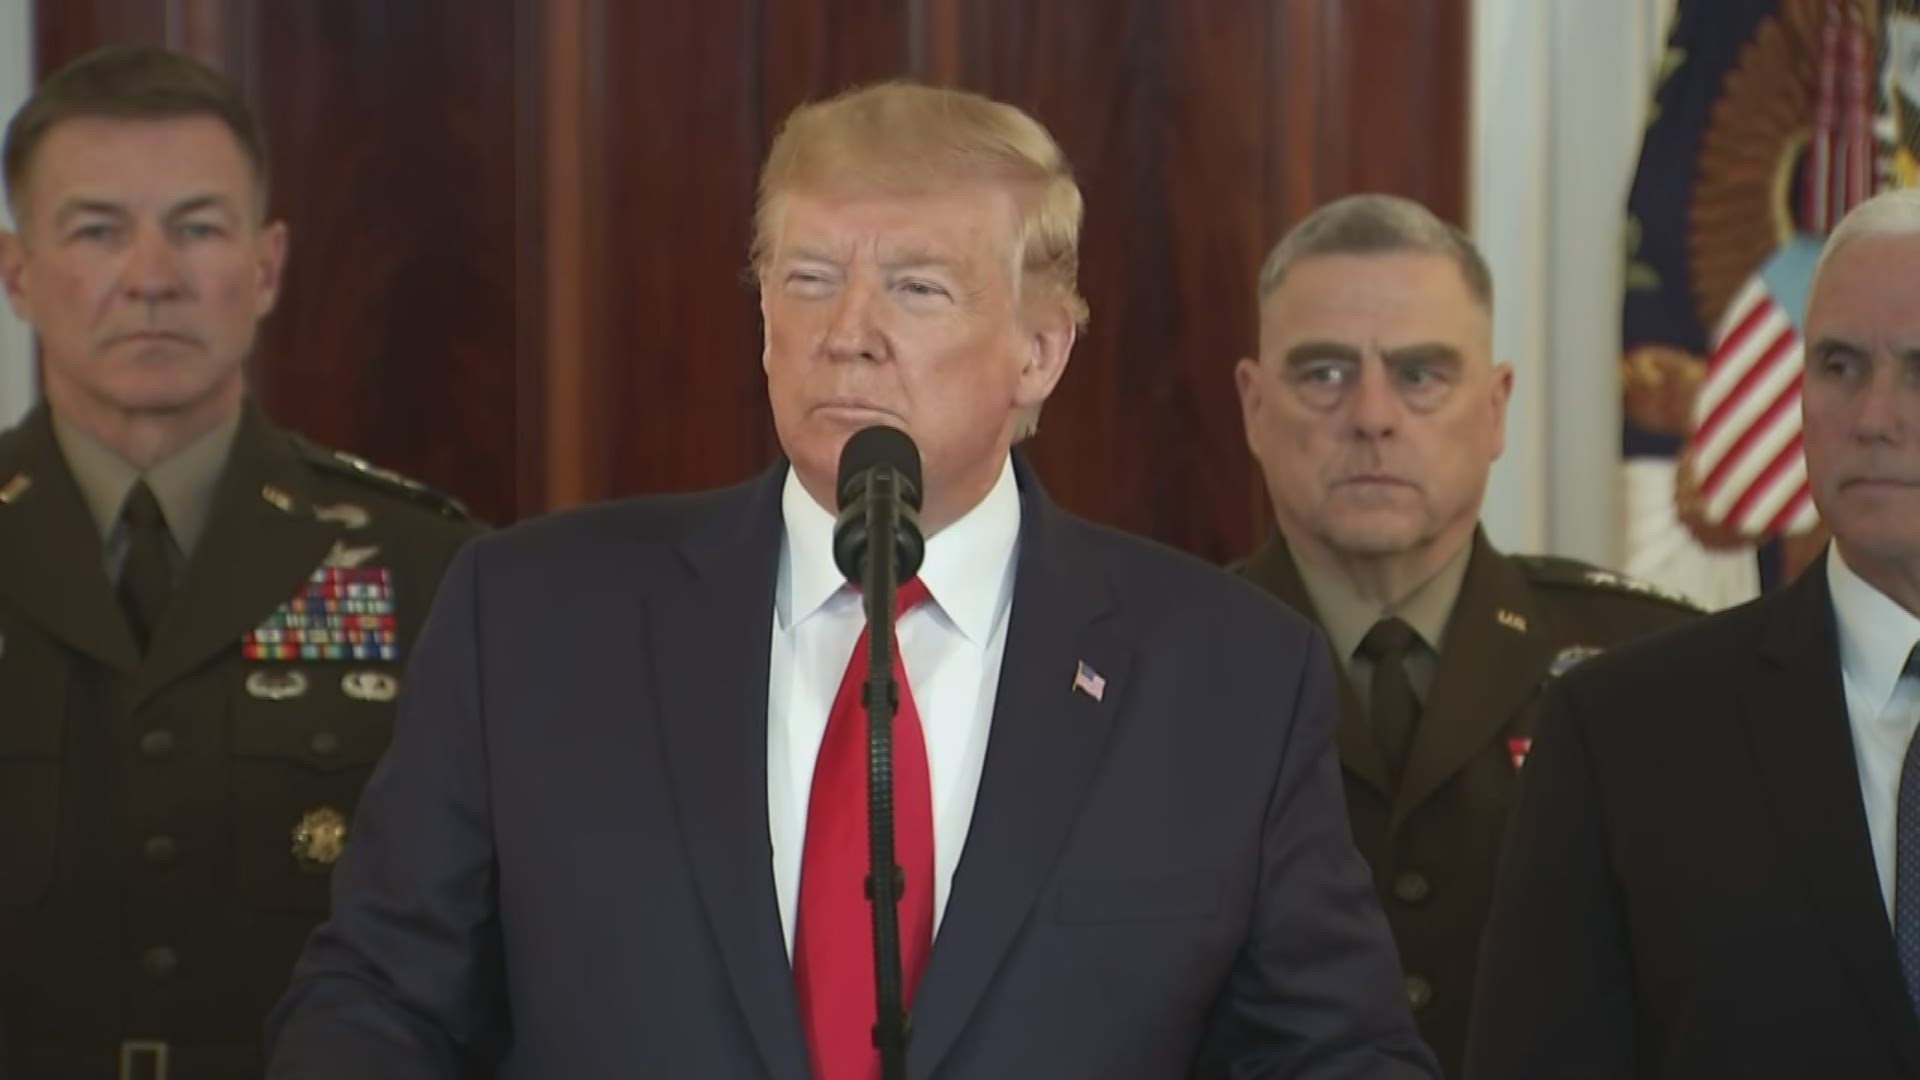 The president addressed the nation Wednesday morning, after Iran launched missiles at Iraqi bases housing U.S. troops in the wake of the killing of Qassem Soleimani.